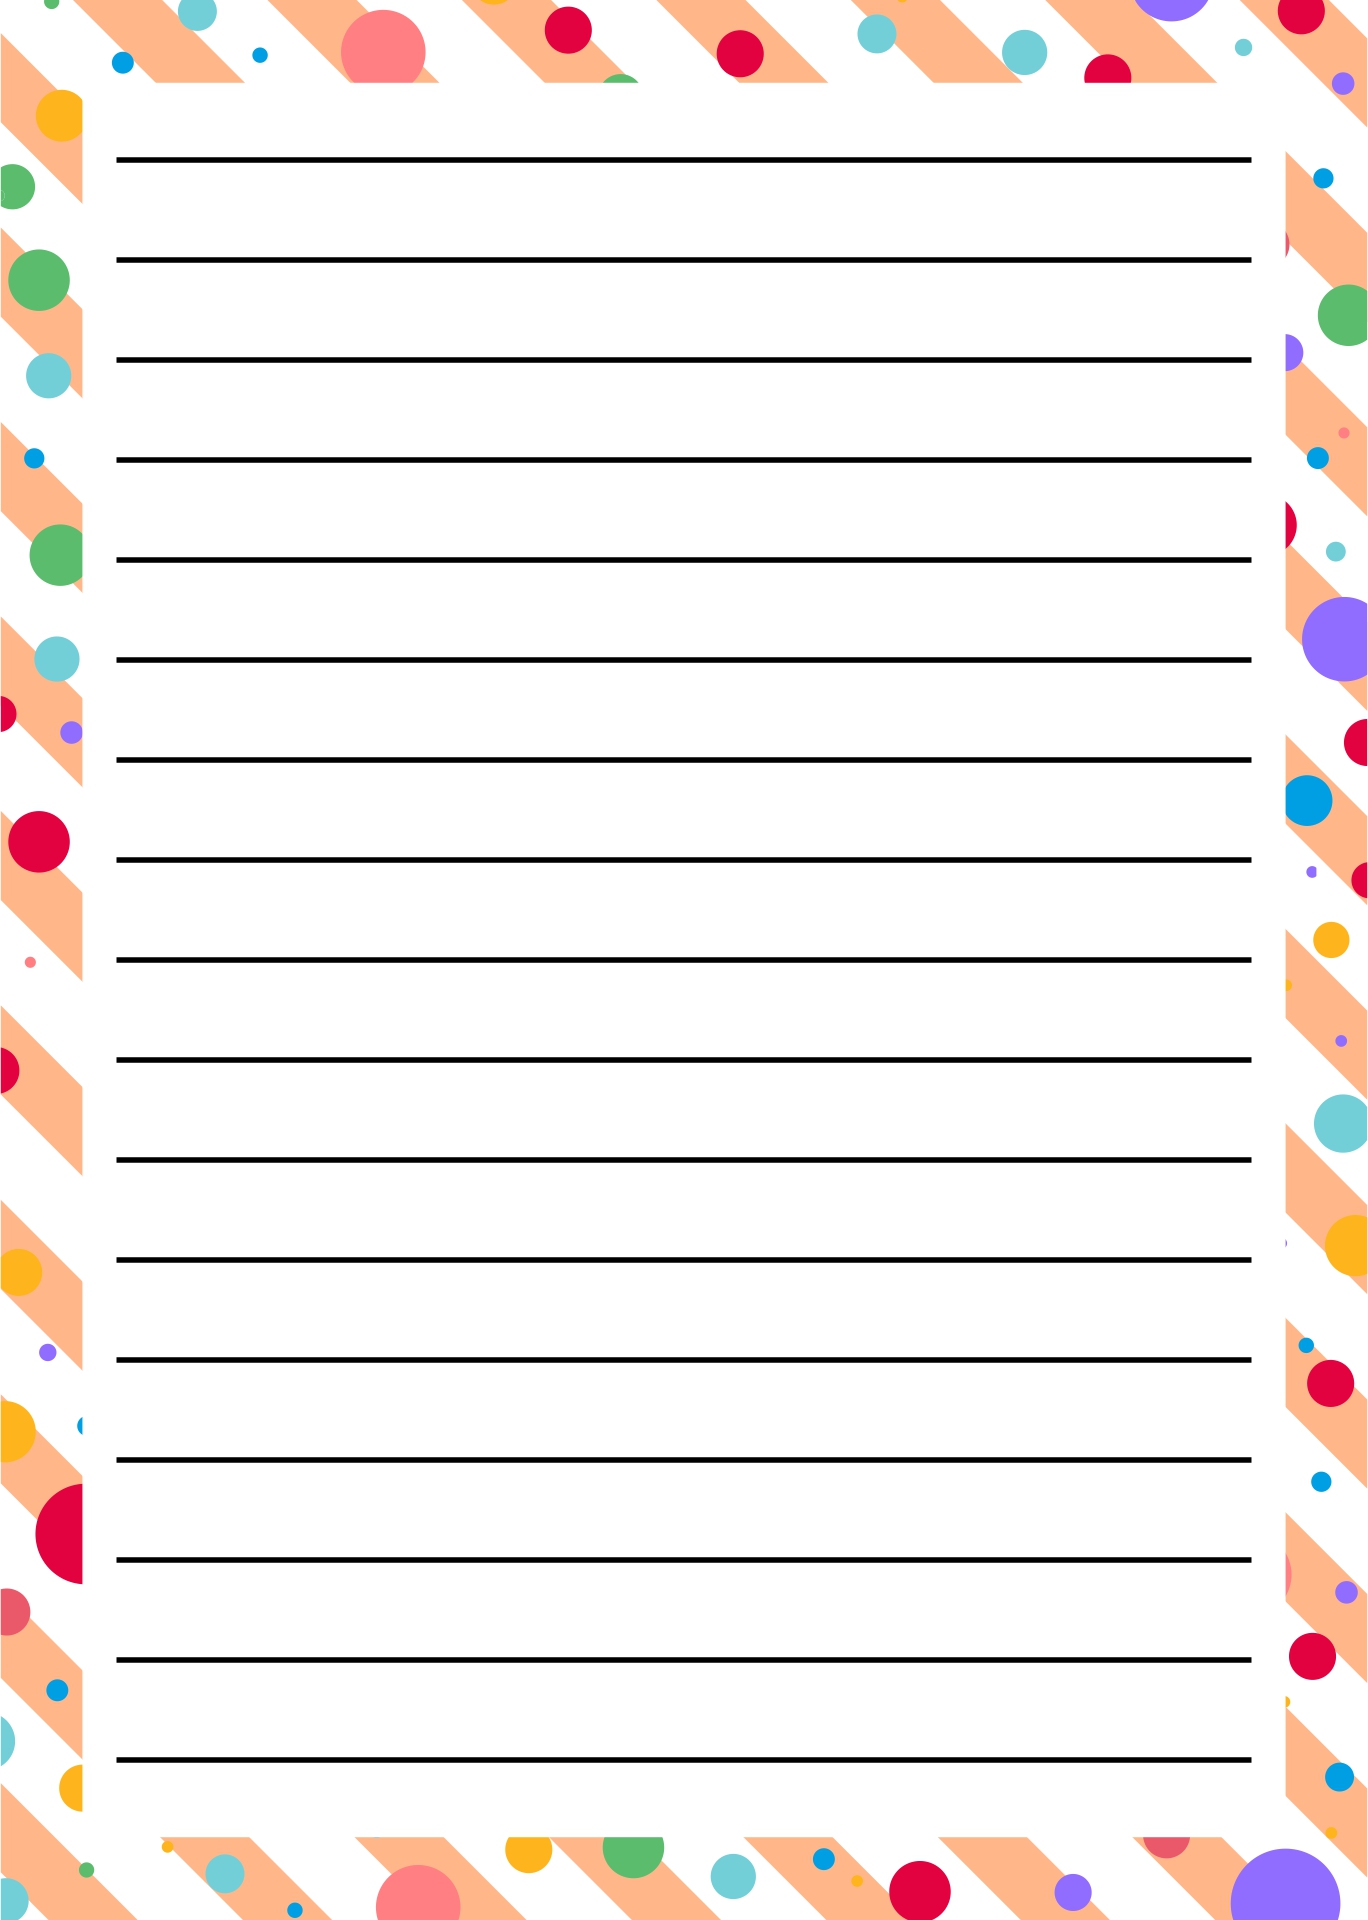 full-size-printable-lined-paper-with-border-prntbl